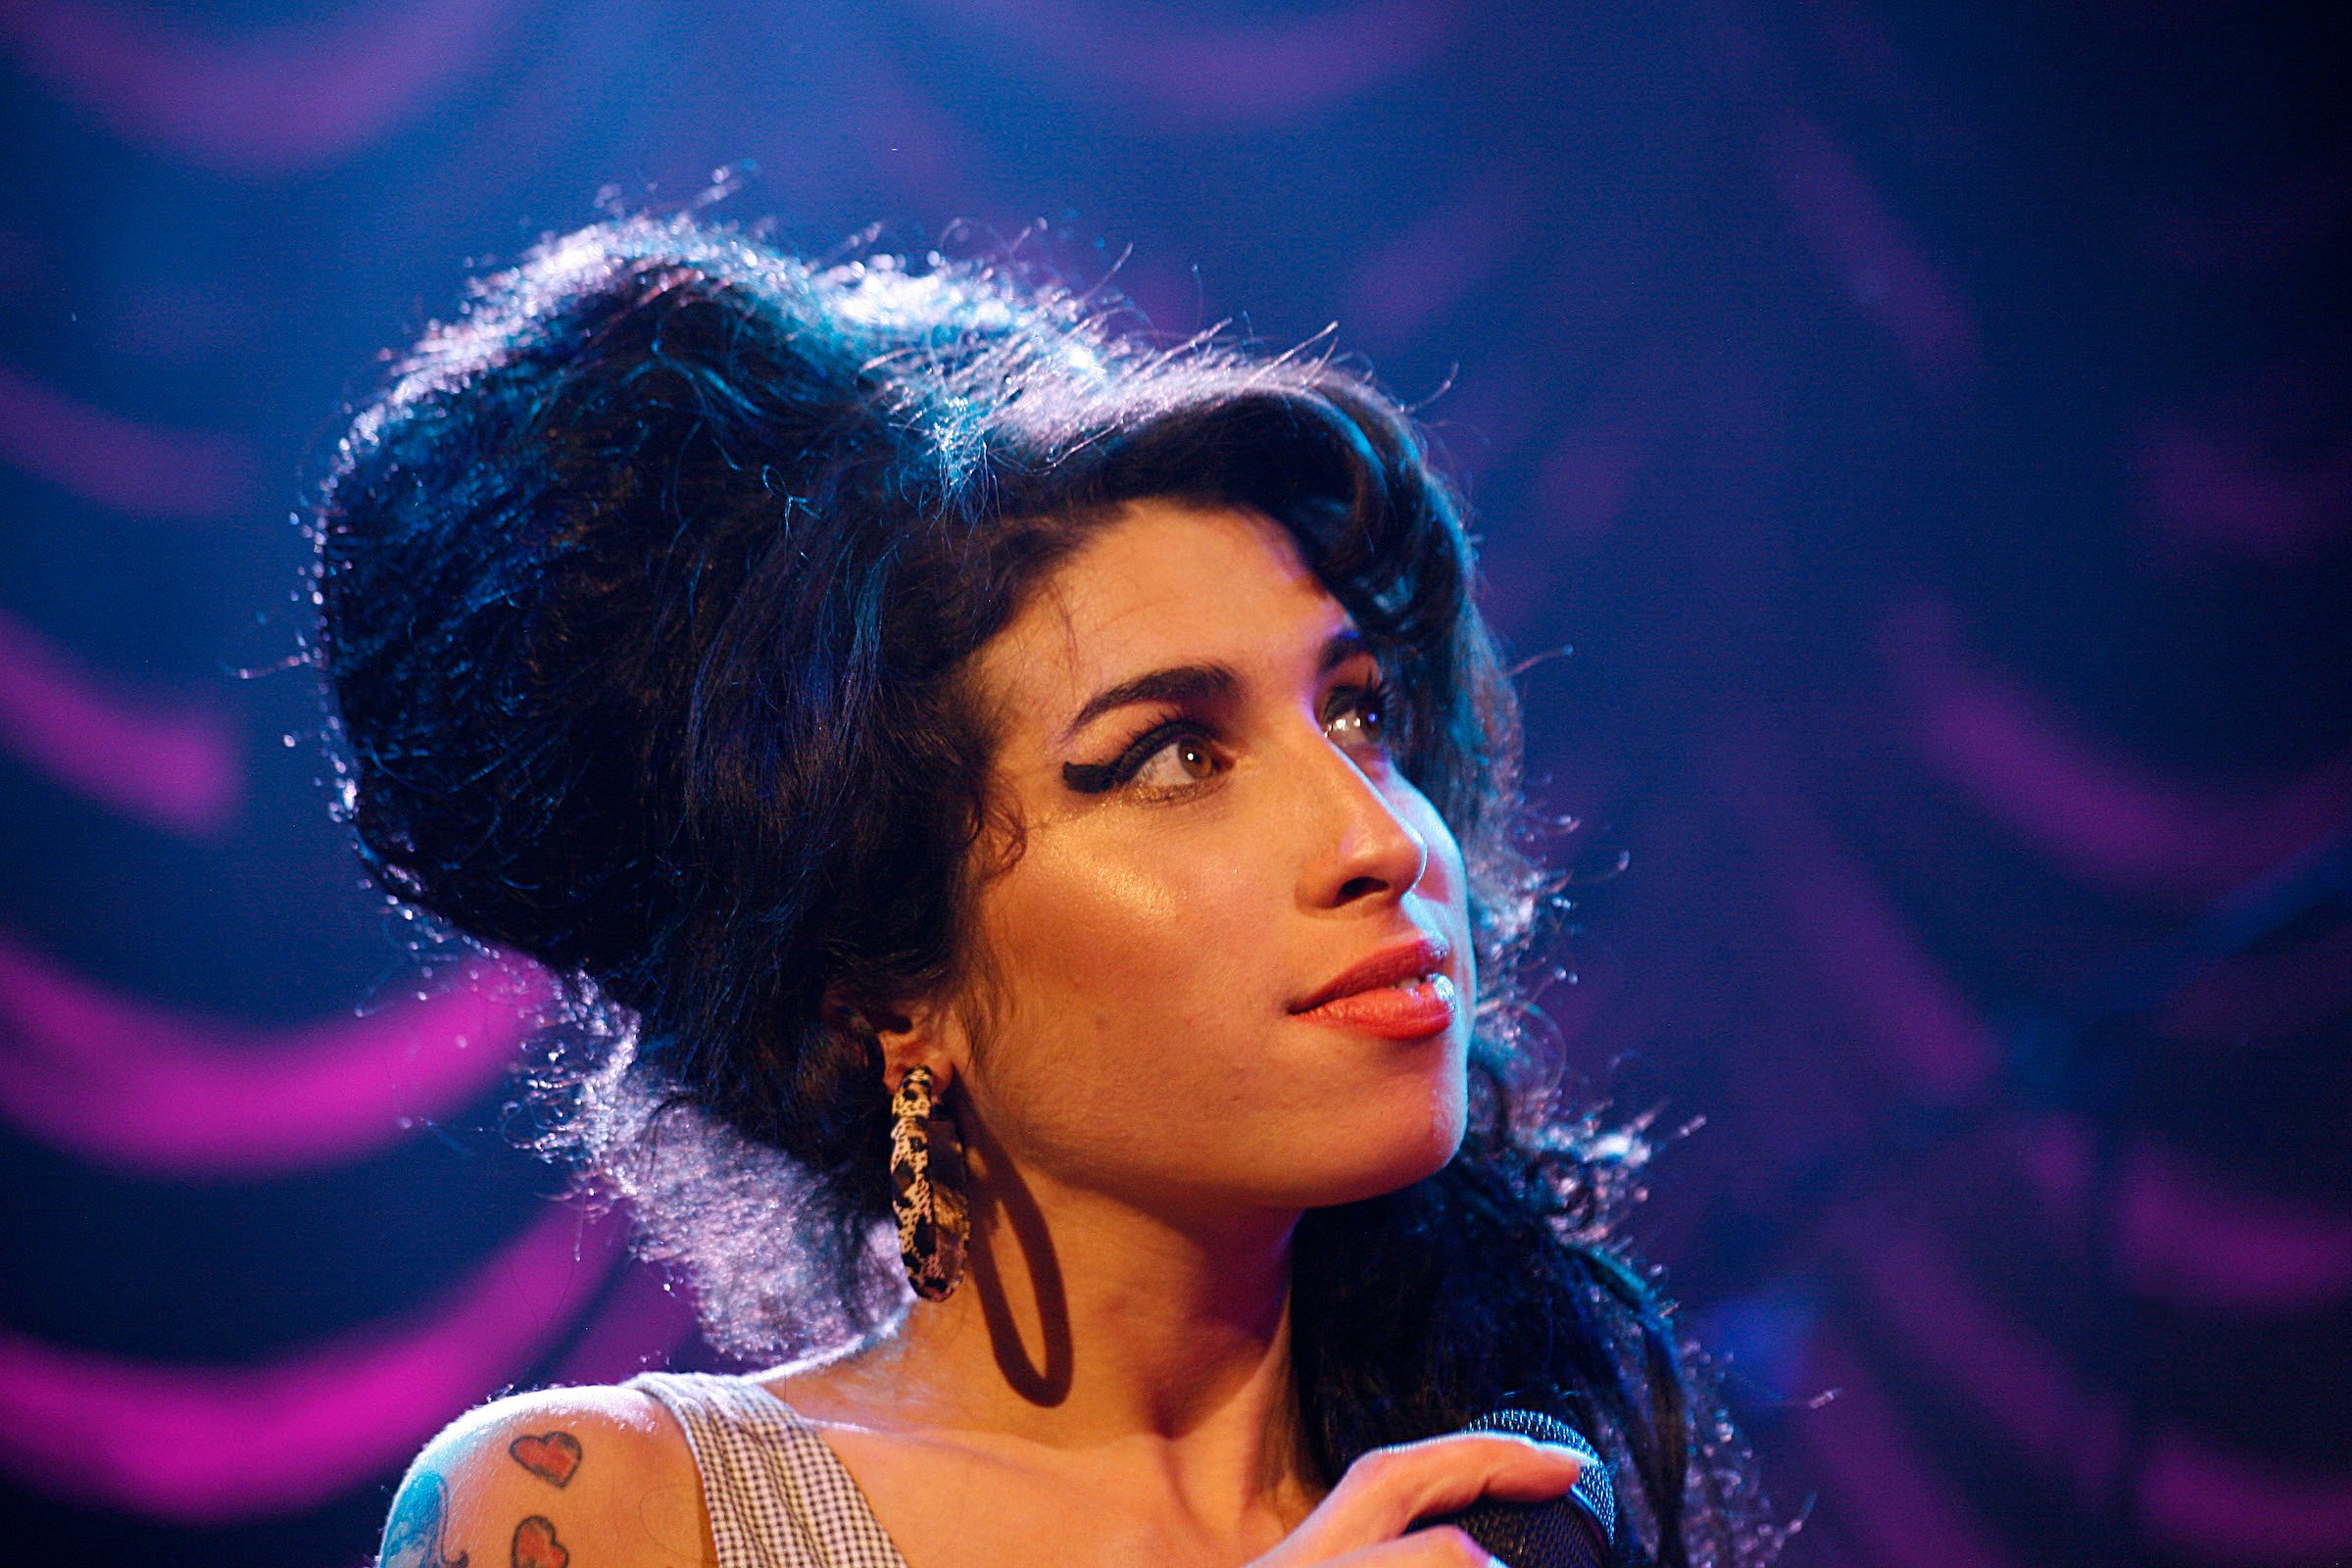 Amy Winehouse, who will be featured in a new biopic